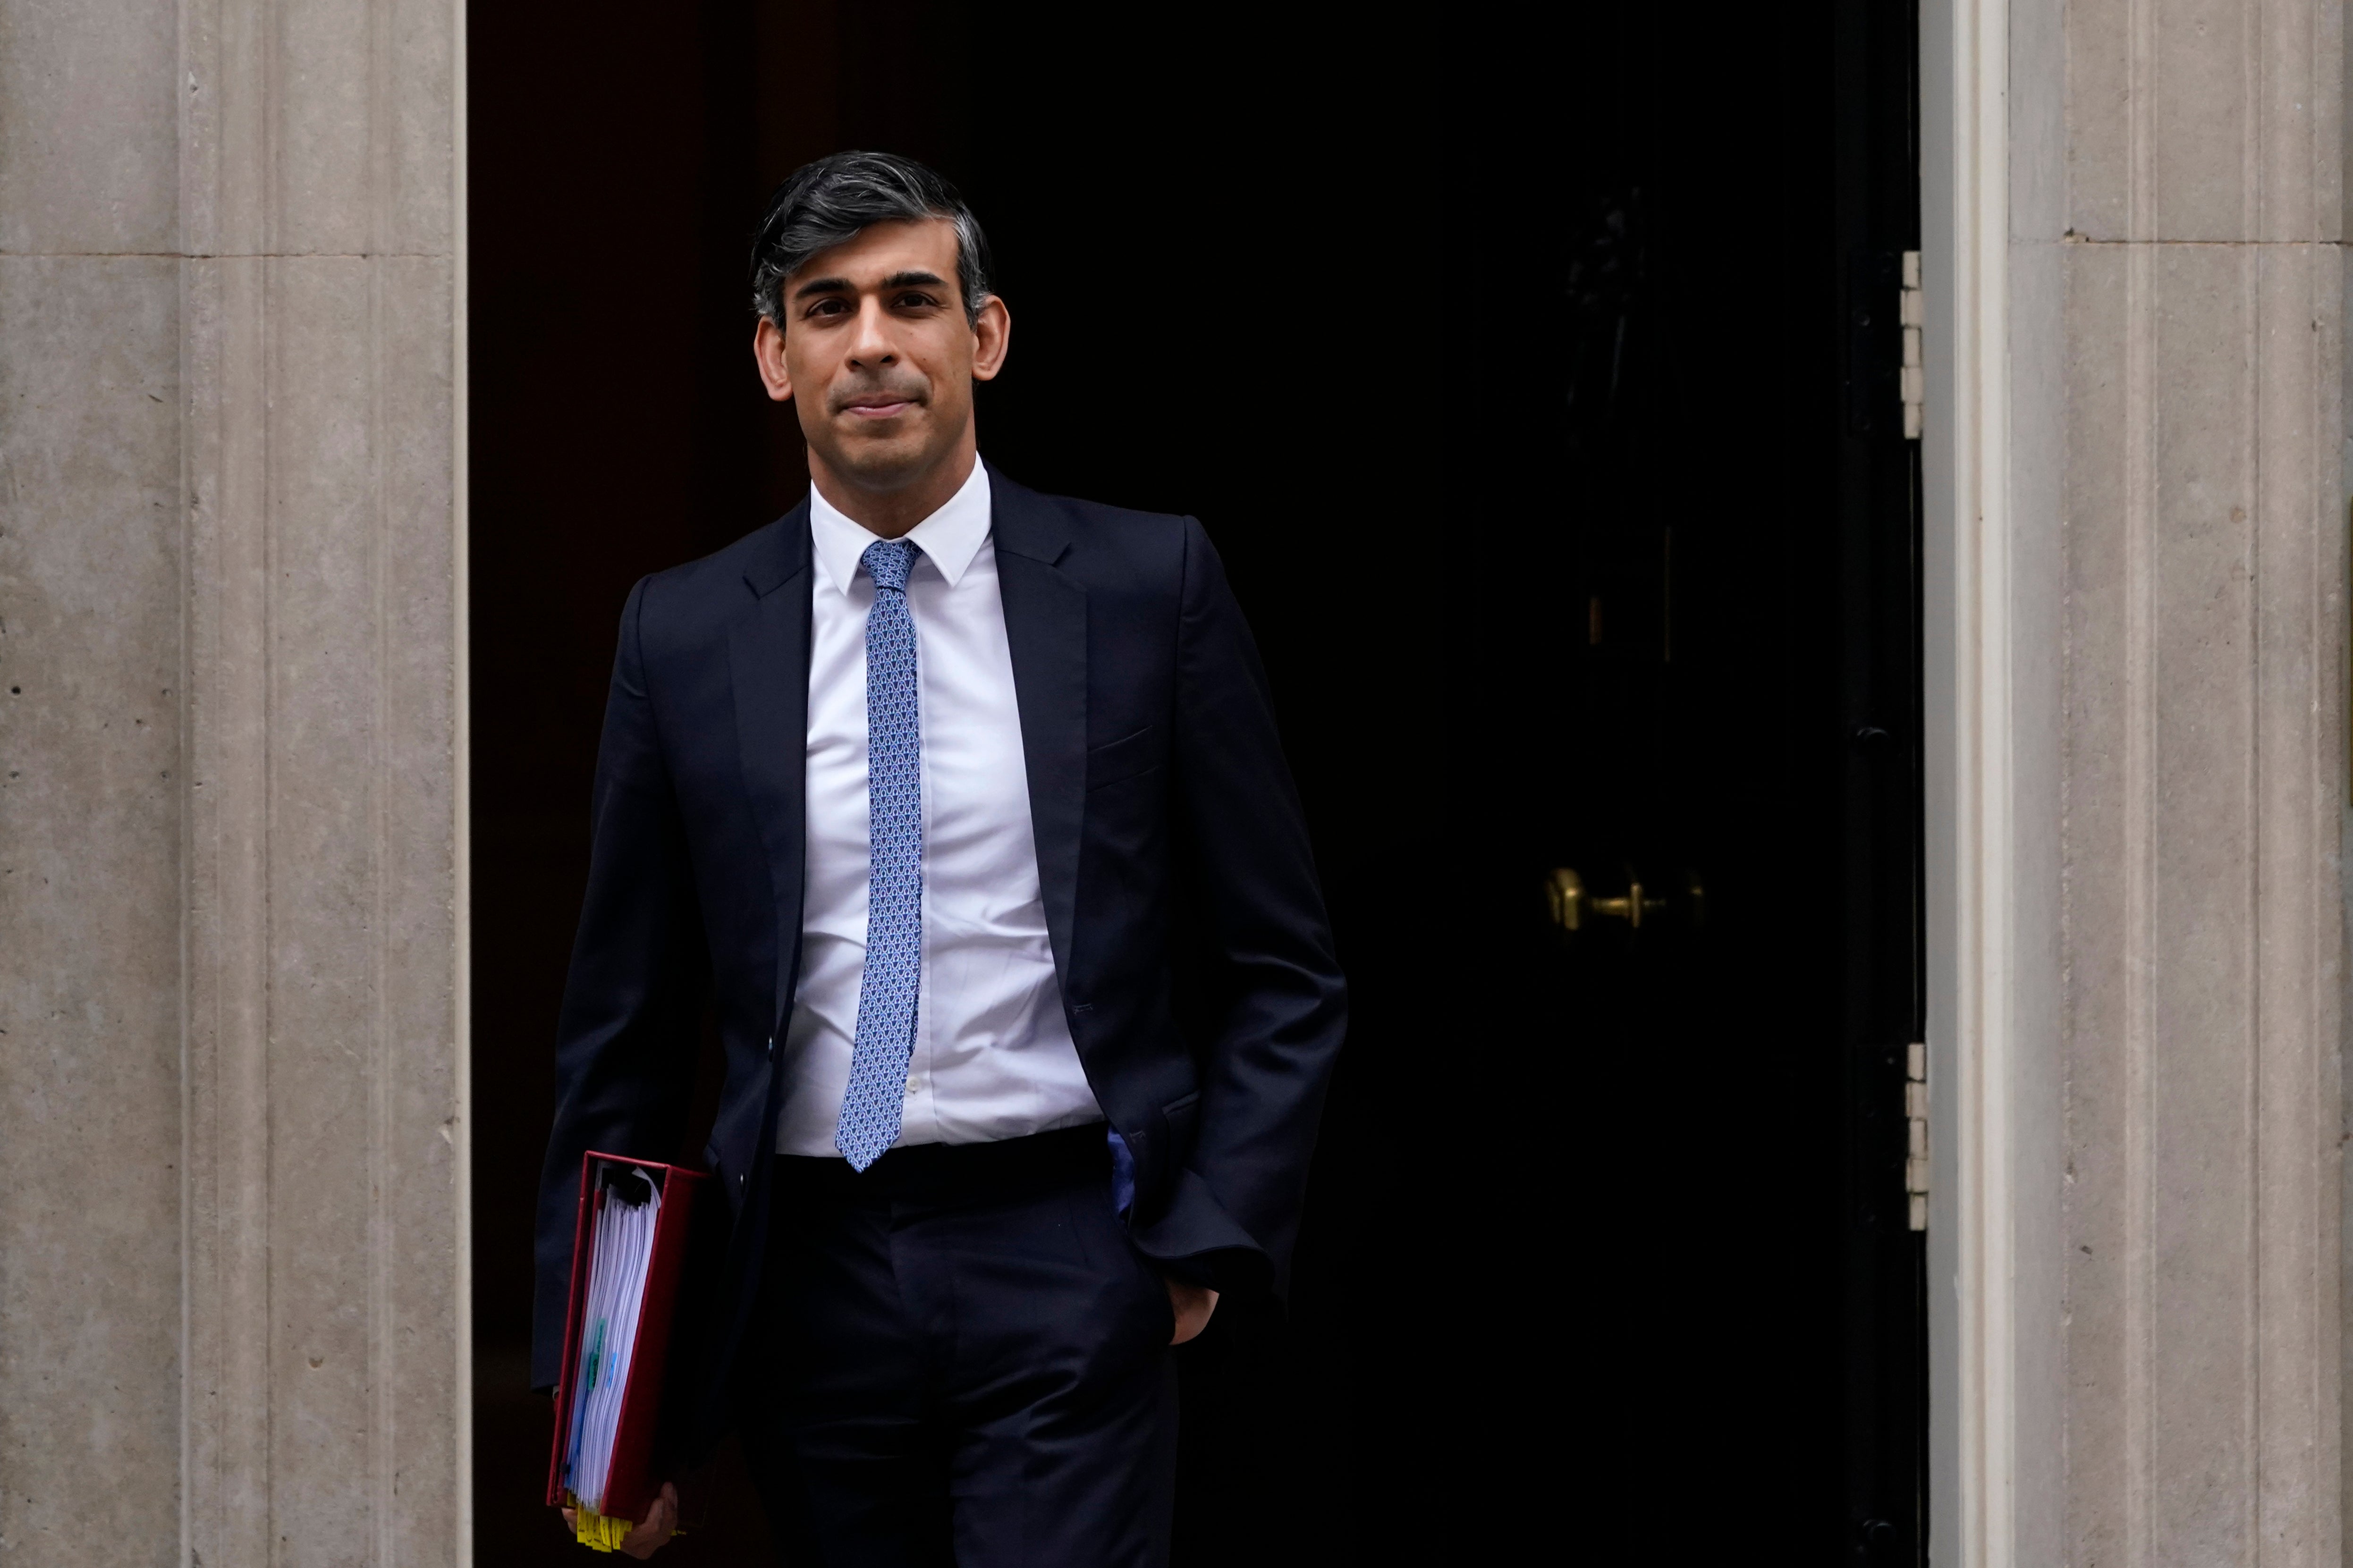 Prime Minster Rishi Sunak departs 10 Downing Street to go to the House of Commons for his weekly PMQS